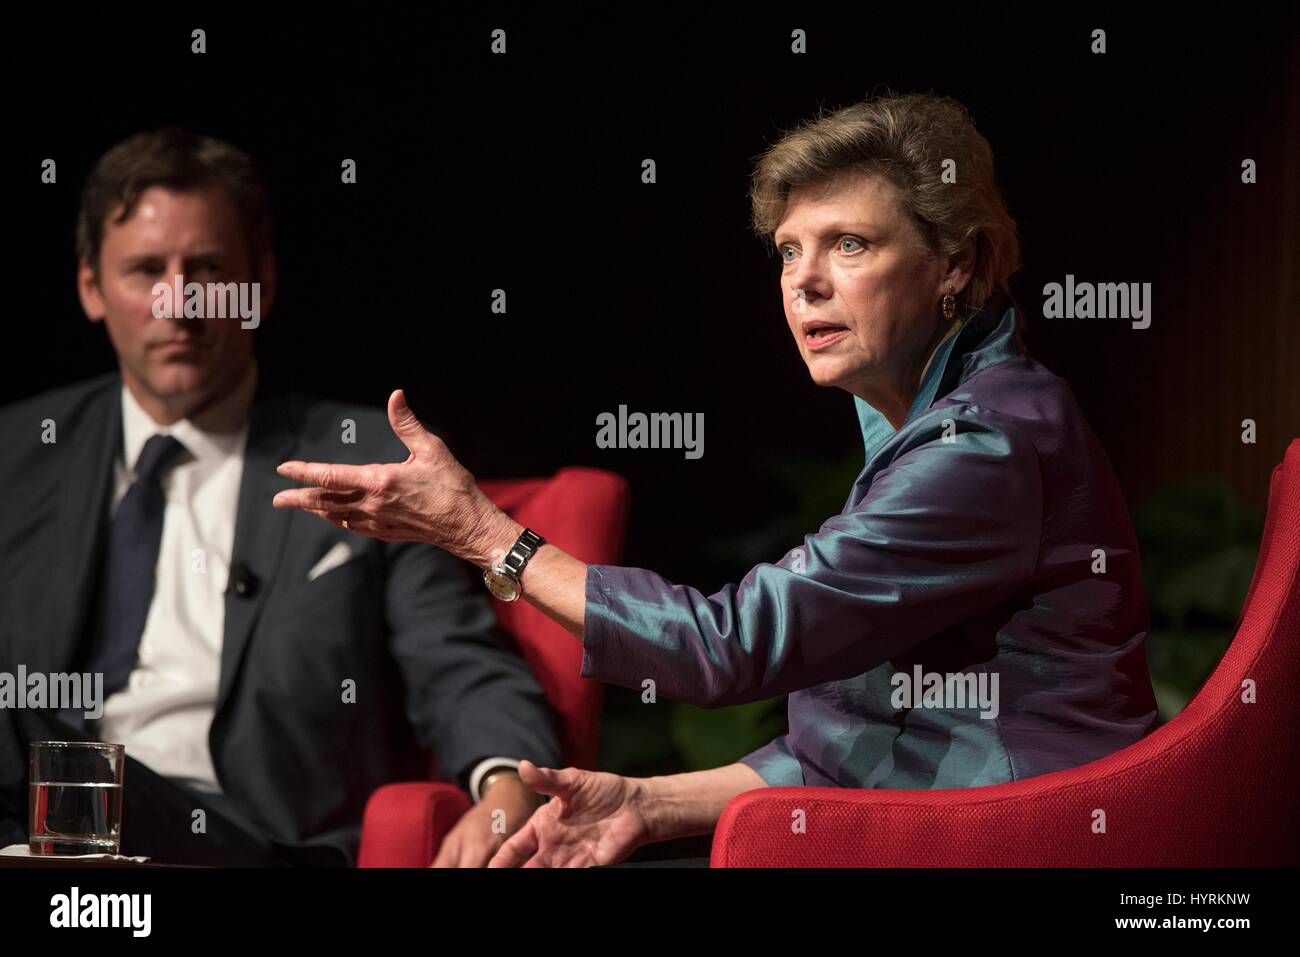 LBJ Presidential Library Director Mark Updegrove moderates the Evening with Cokie Roberts discussion with journalist Cokie Roberts at the LBJ Presidential Library February 28, 2017 in Austin, Texas. Stock Photo